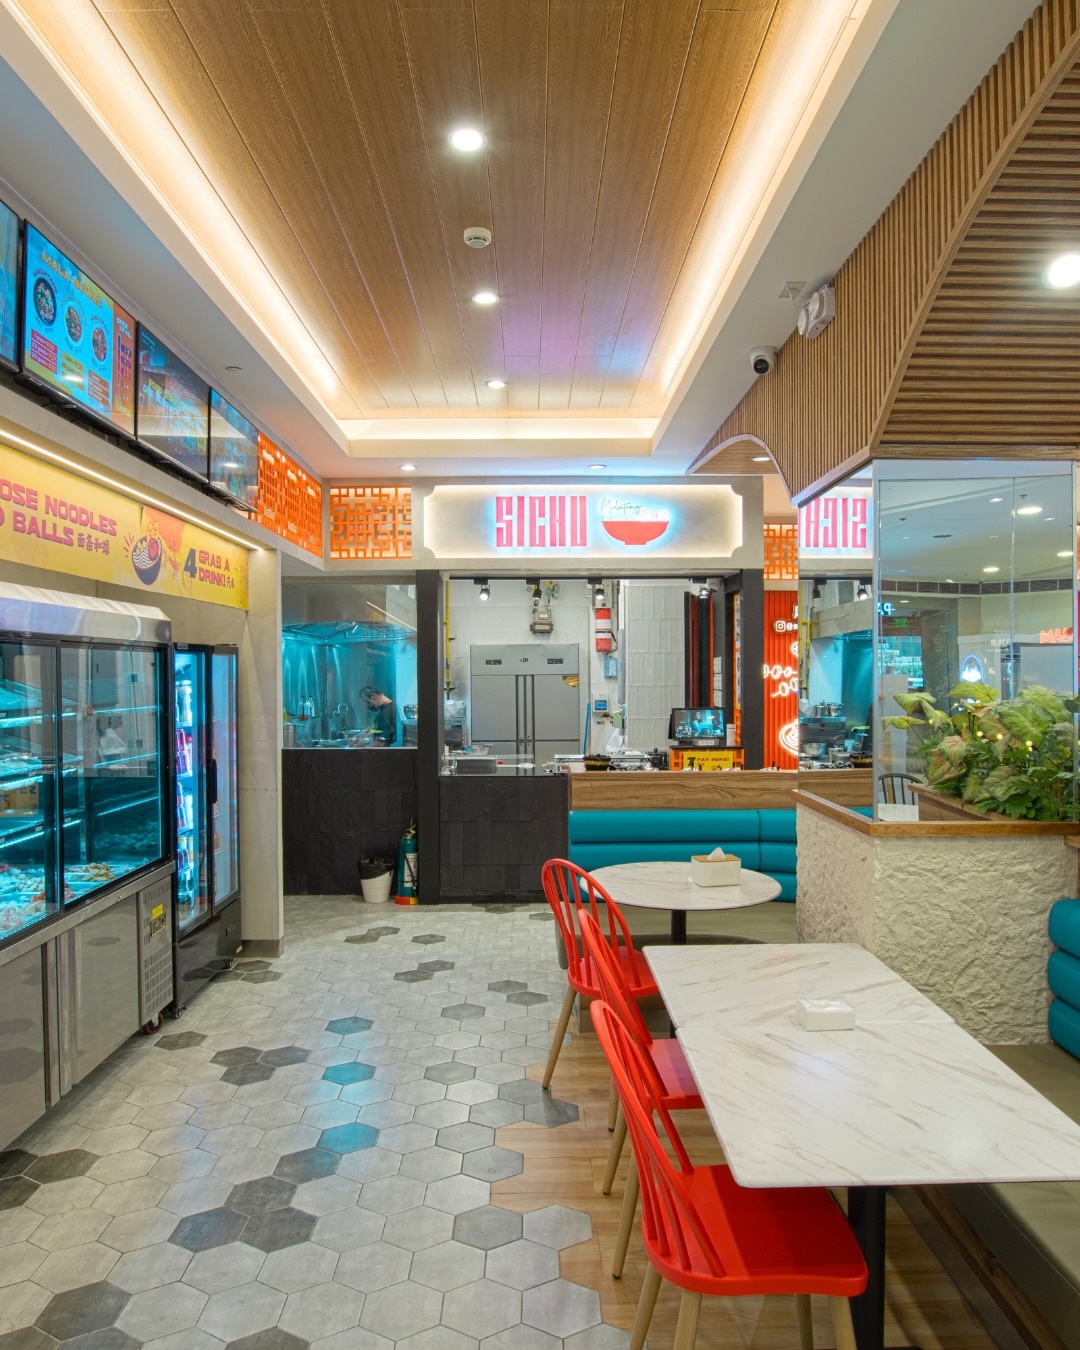 Sichu Malatang interiors of its UP Town Center branch